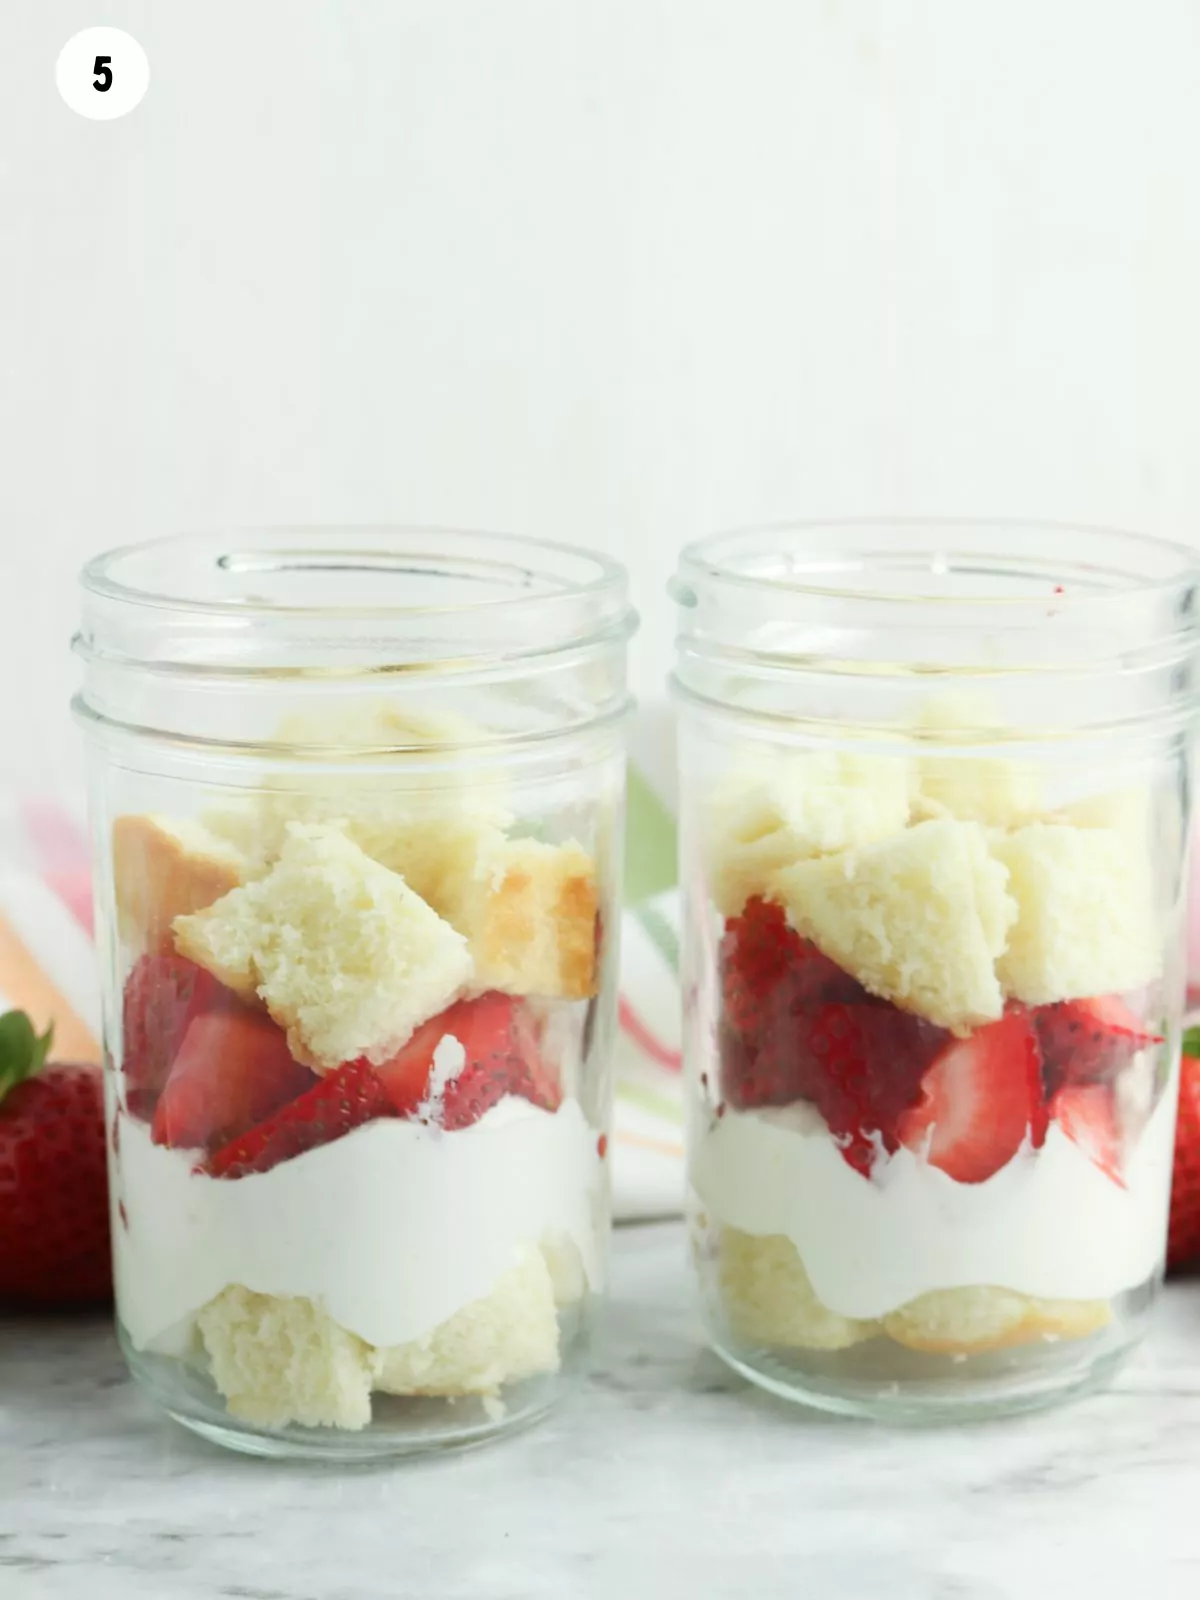 pieces of pound cake with strawberries and whipped cream in mason jars.